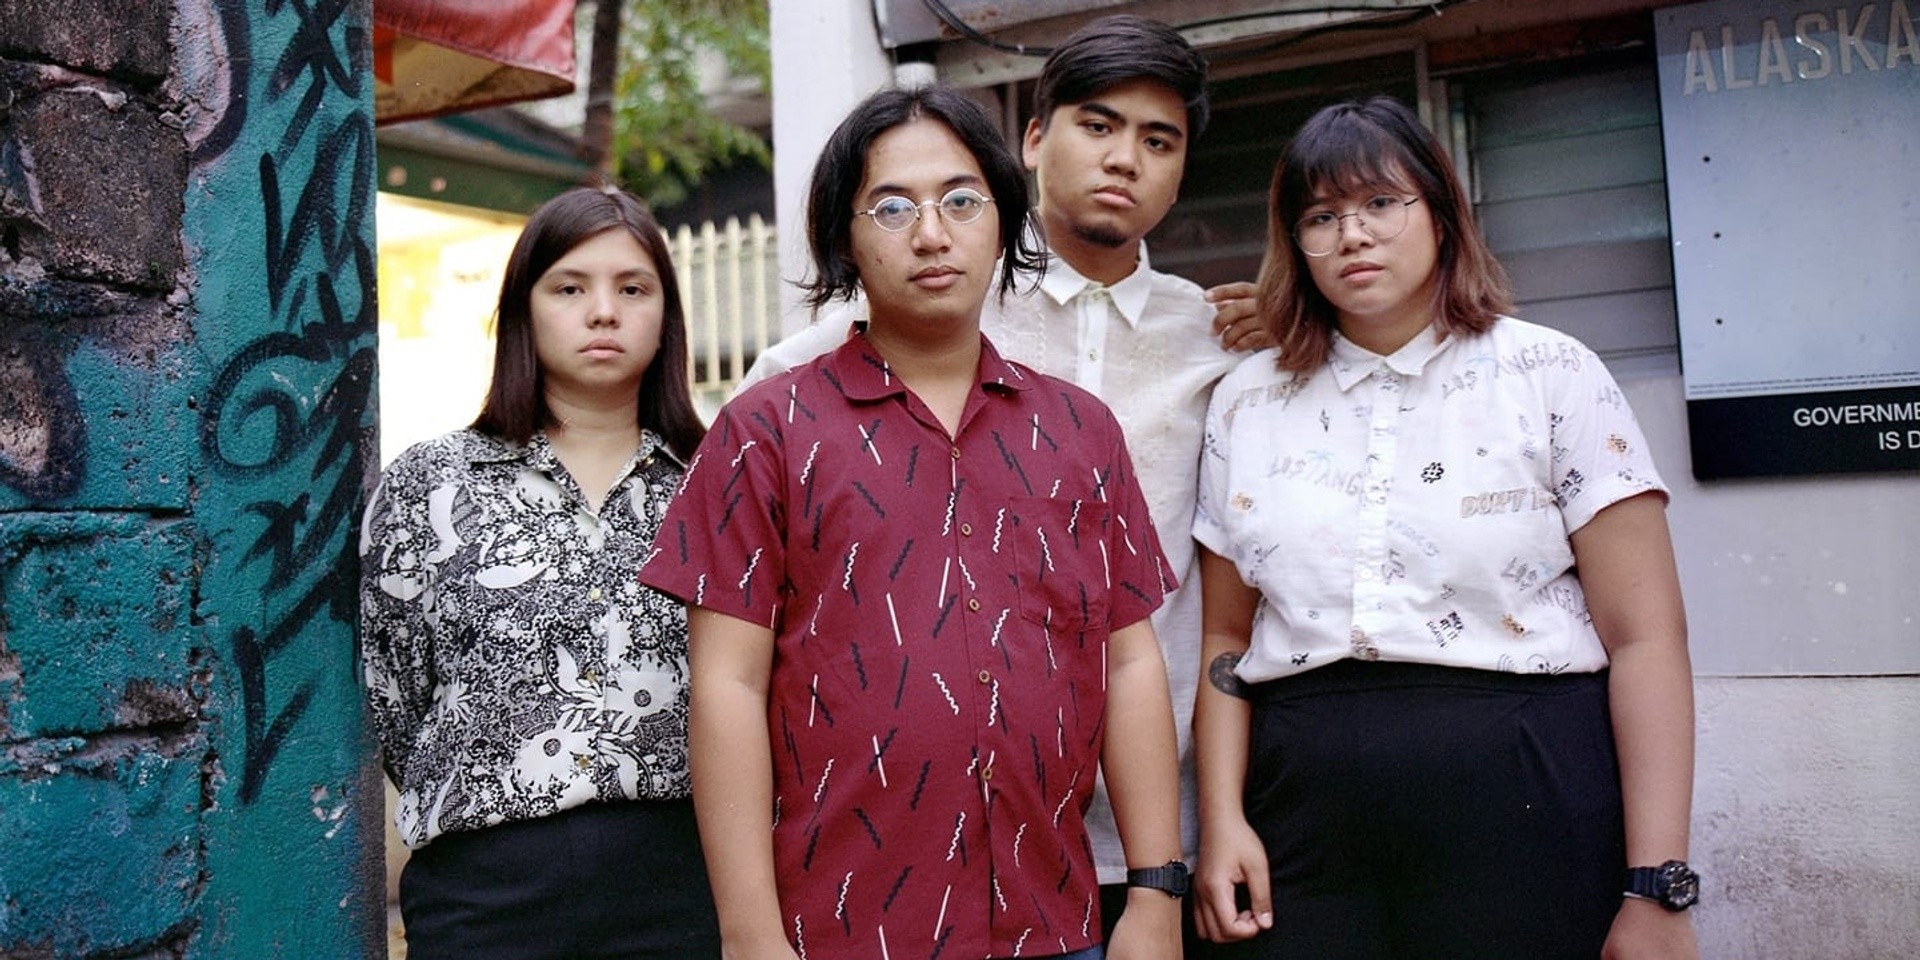 Oh, Flamingo! release new single, 'Naubos Na' from upcoming EP, Volumes – listen